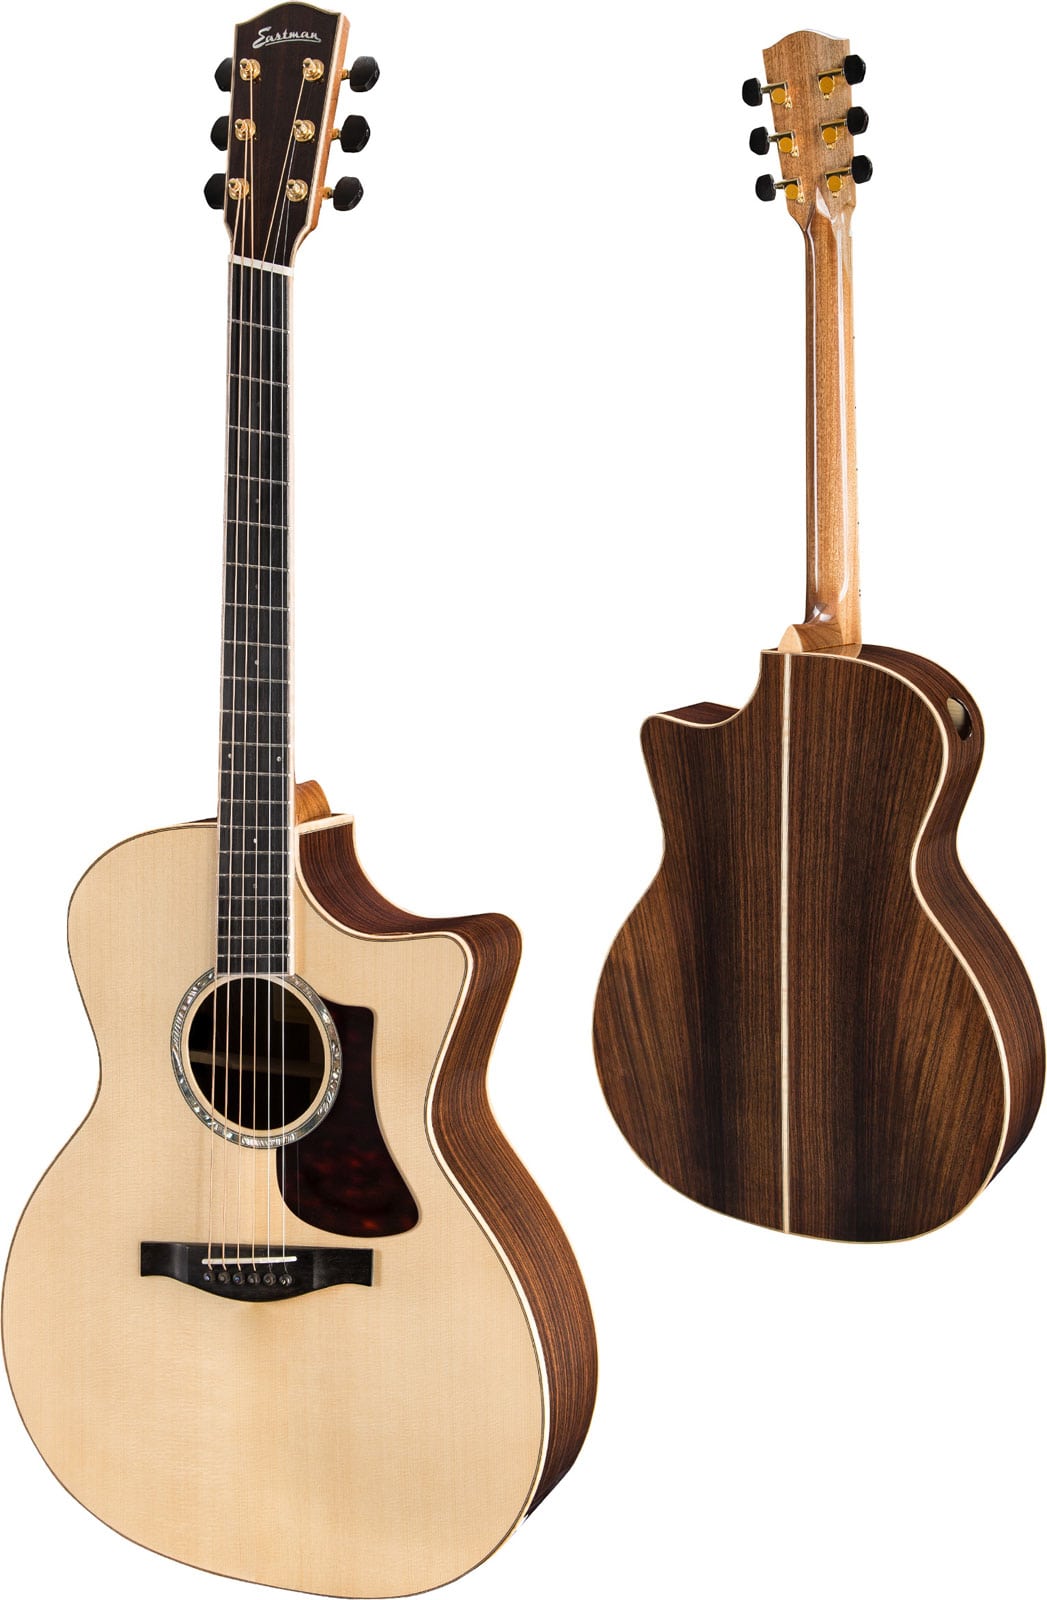 EASTMAN AC822CE-FF NATURAL